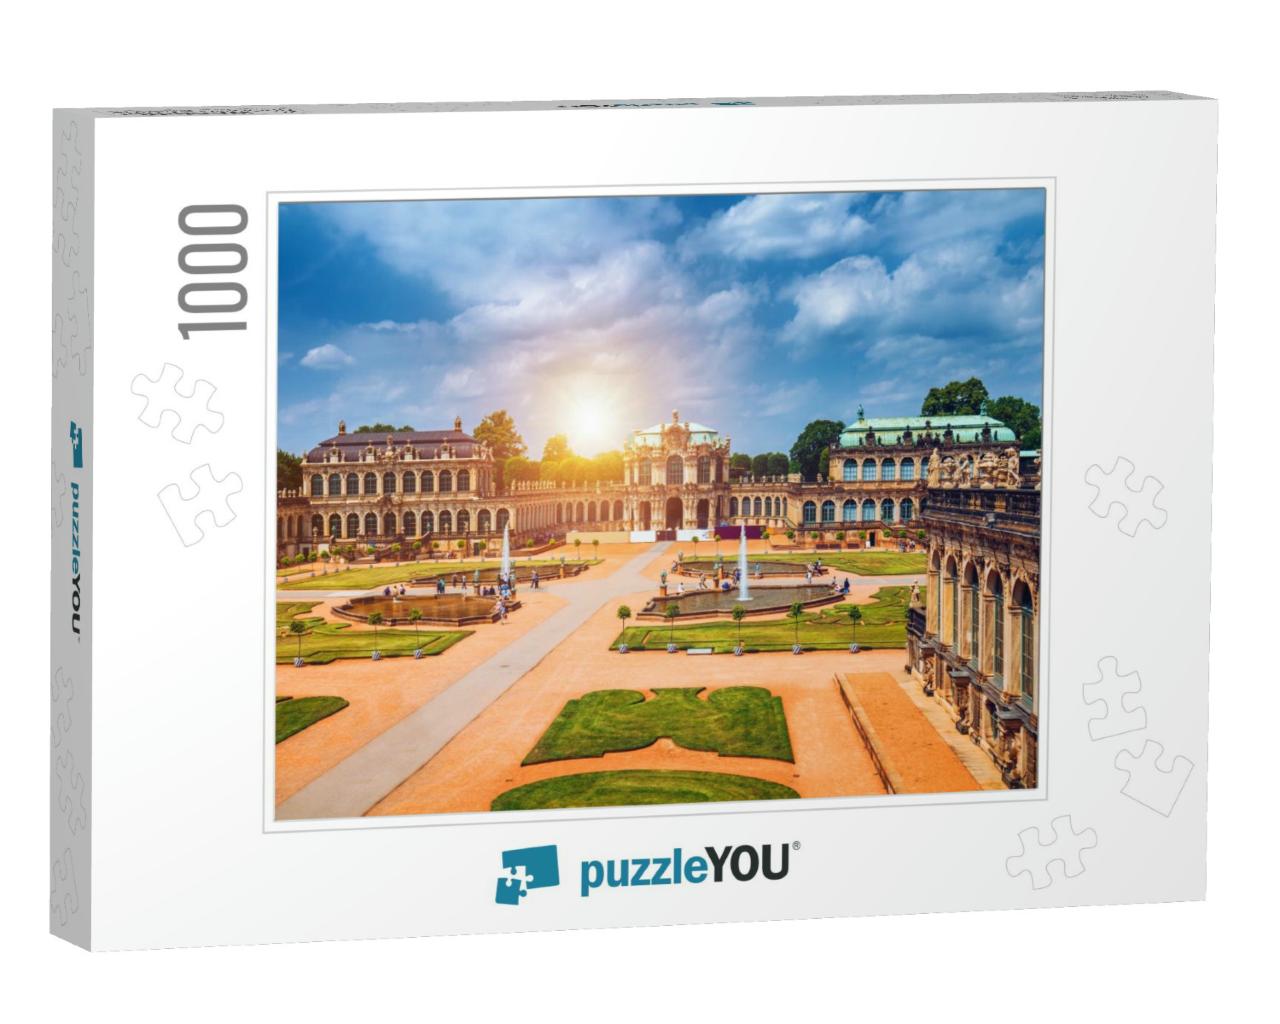 Famous Zwinger Palace Der Dresdner Zwinger Art Gallery of... Jigsaw Puzzle with 1000 pieces